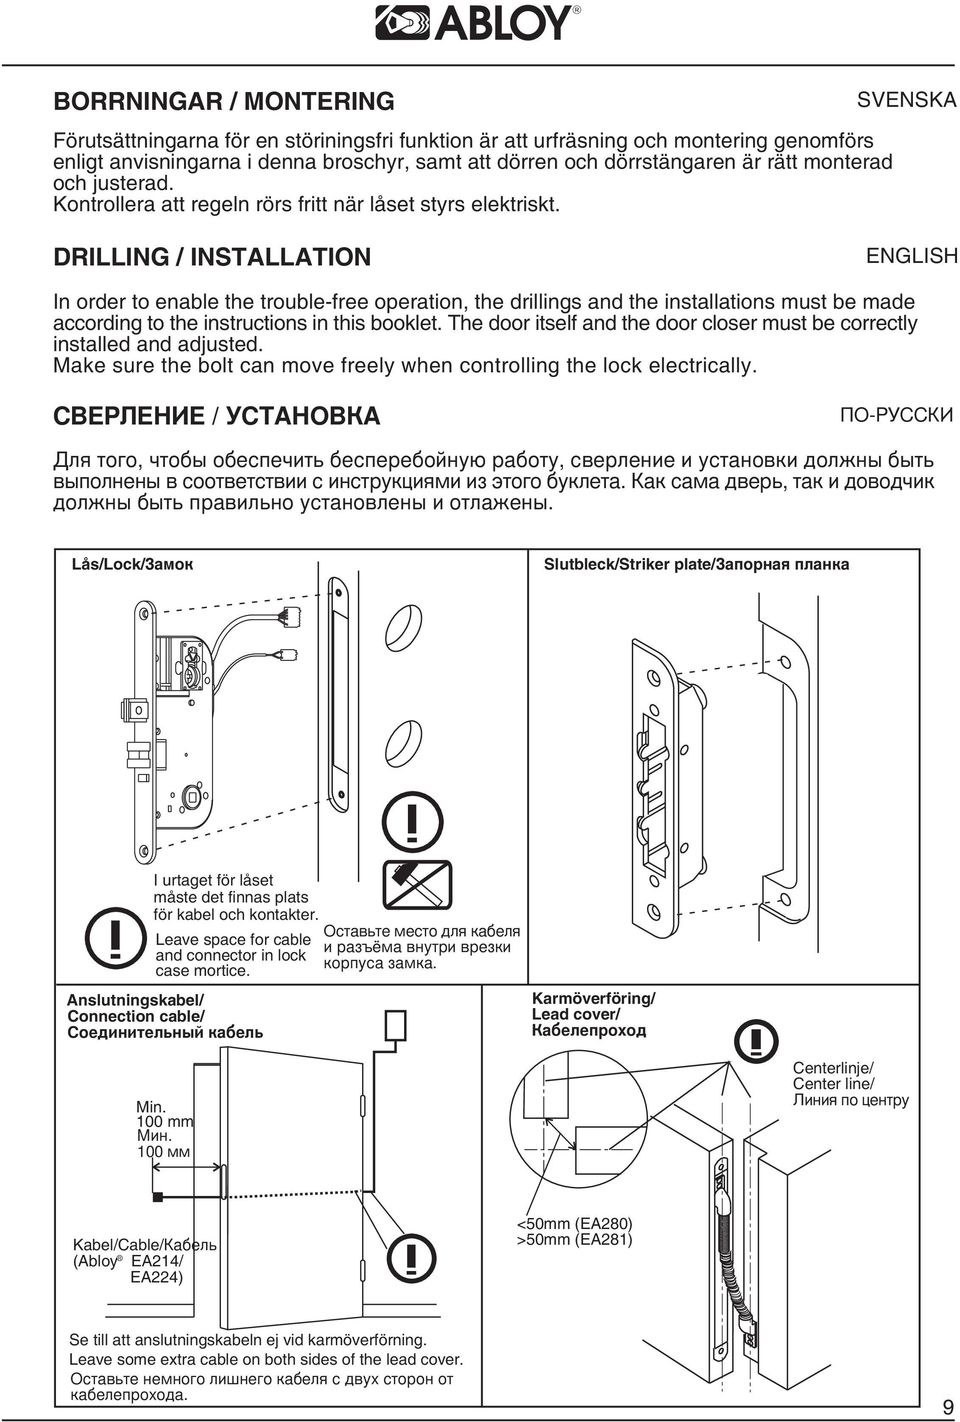 SVENSKA DRILLING / INSTALLATION ENGLISH In order to enable the trouble-free operation, the drillings and the installations must be made according to the instructions in this booklet.